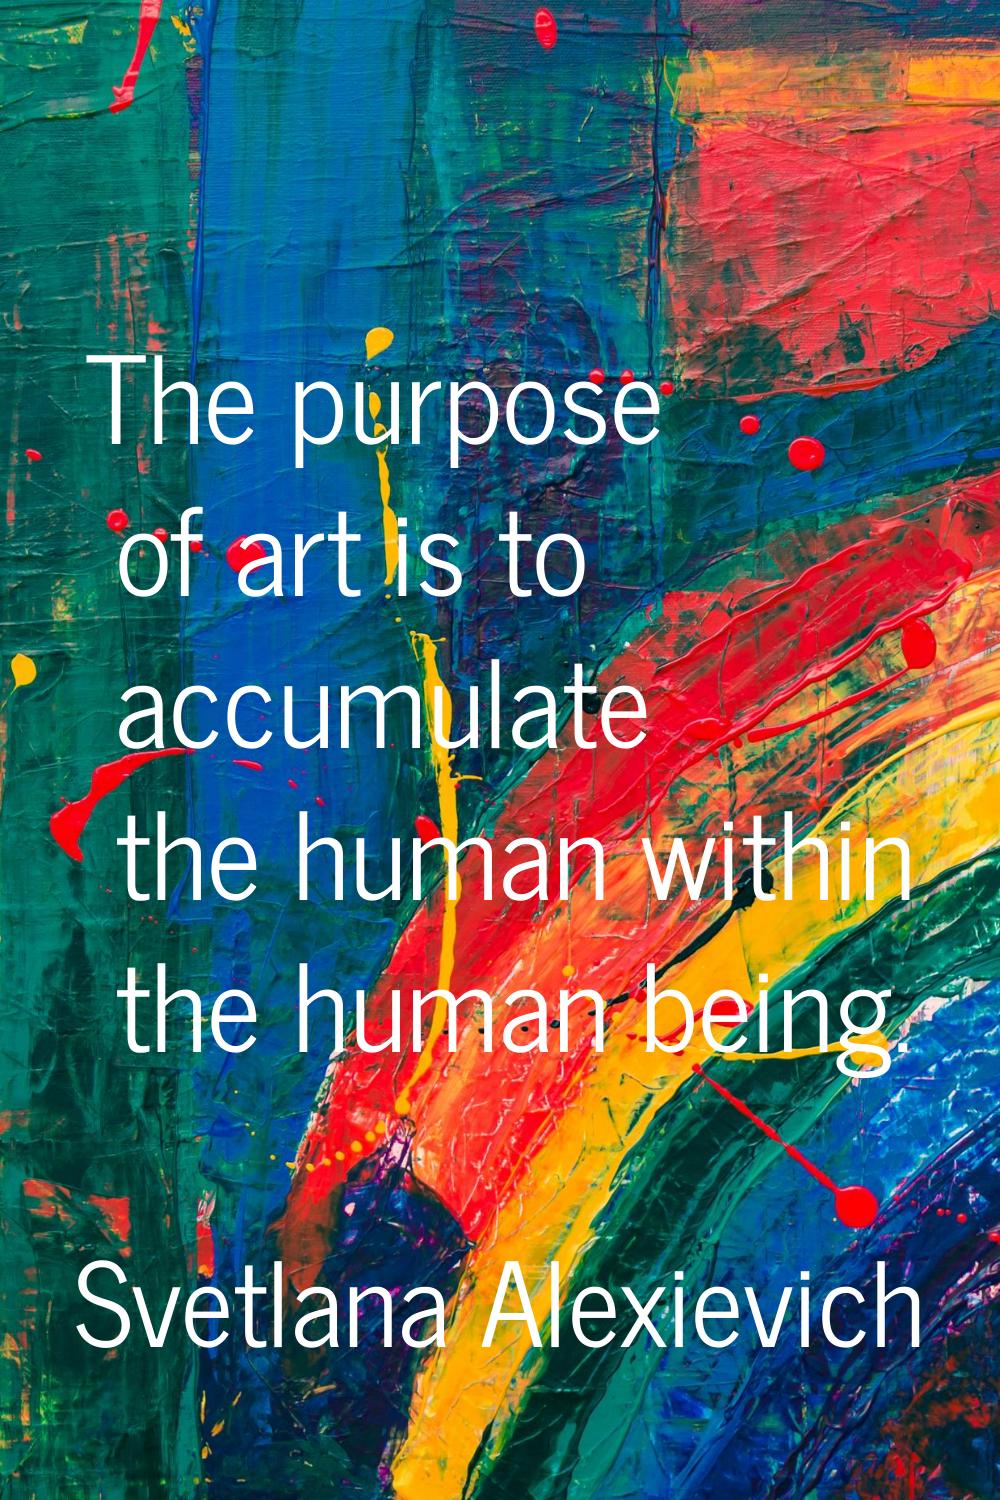 The purpose of art is to accumulate the human within the human being.